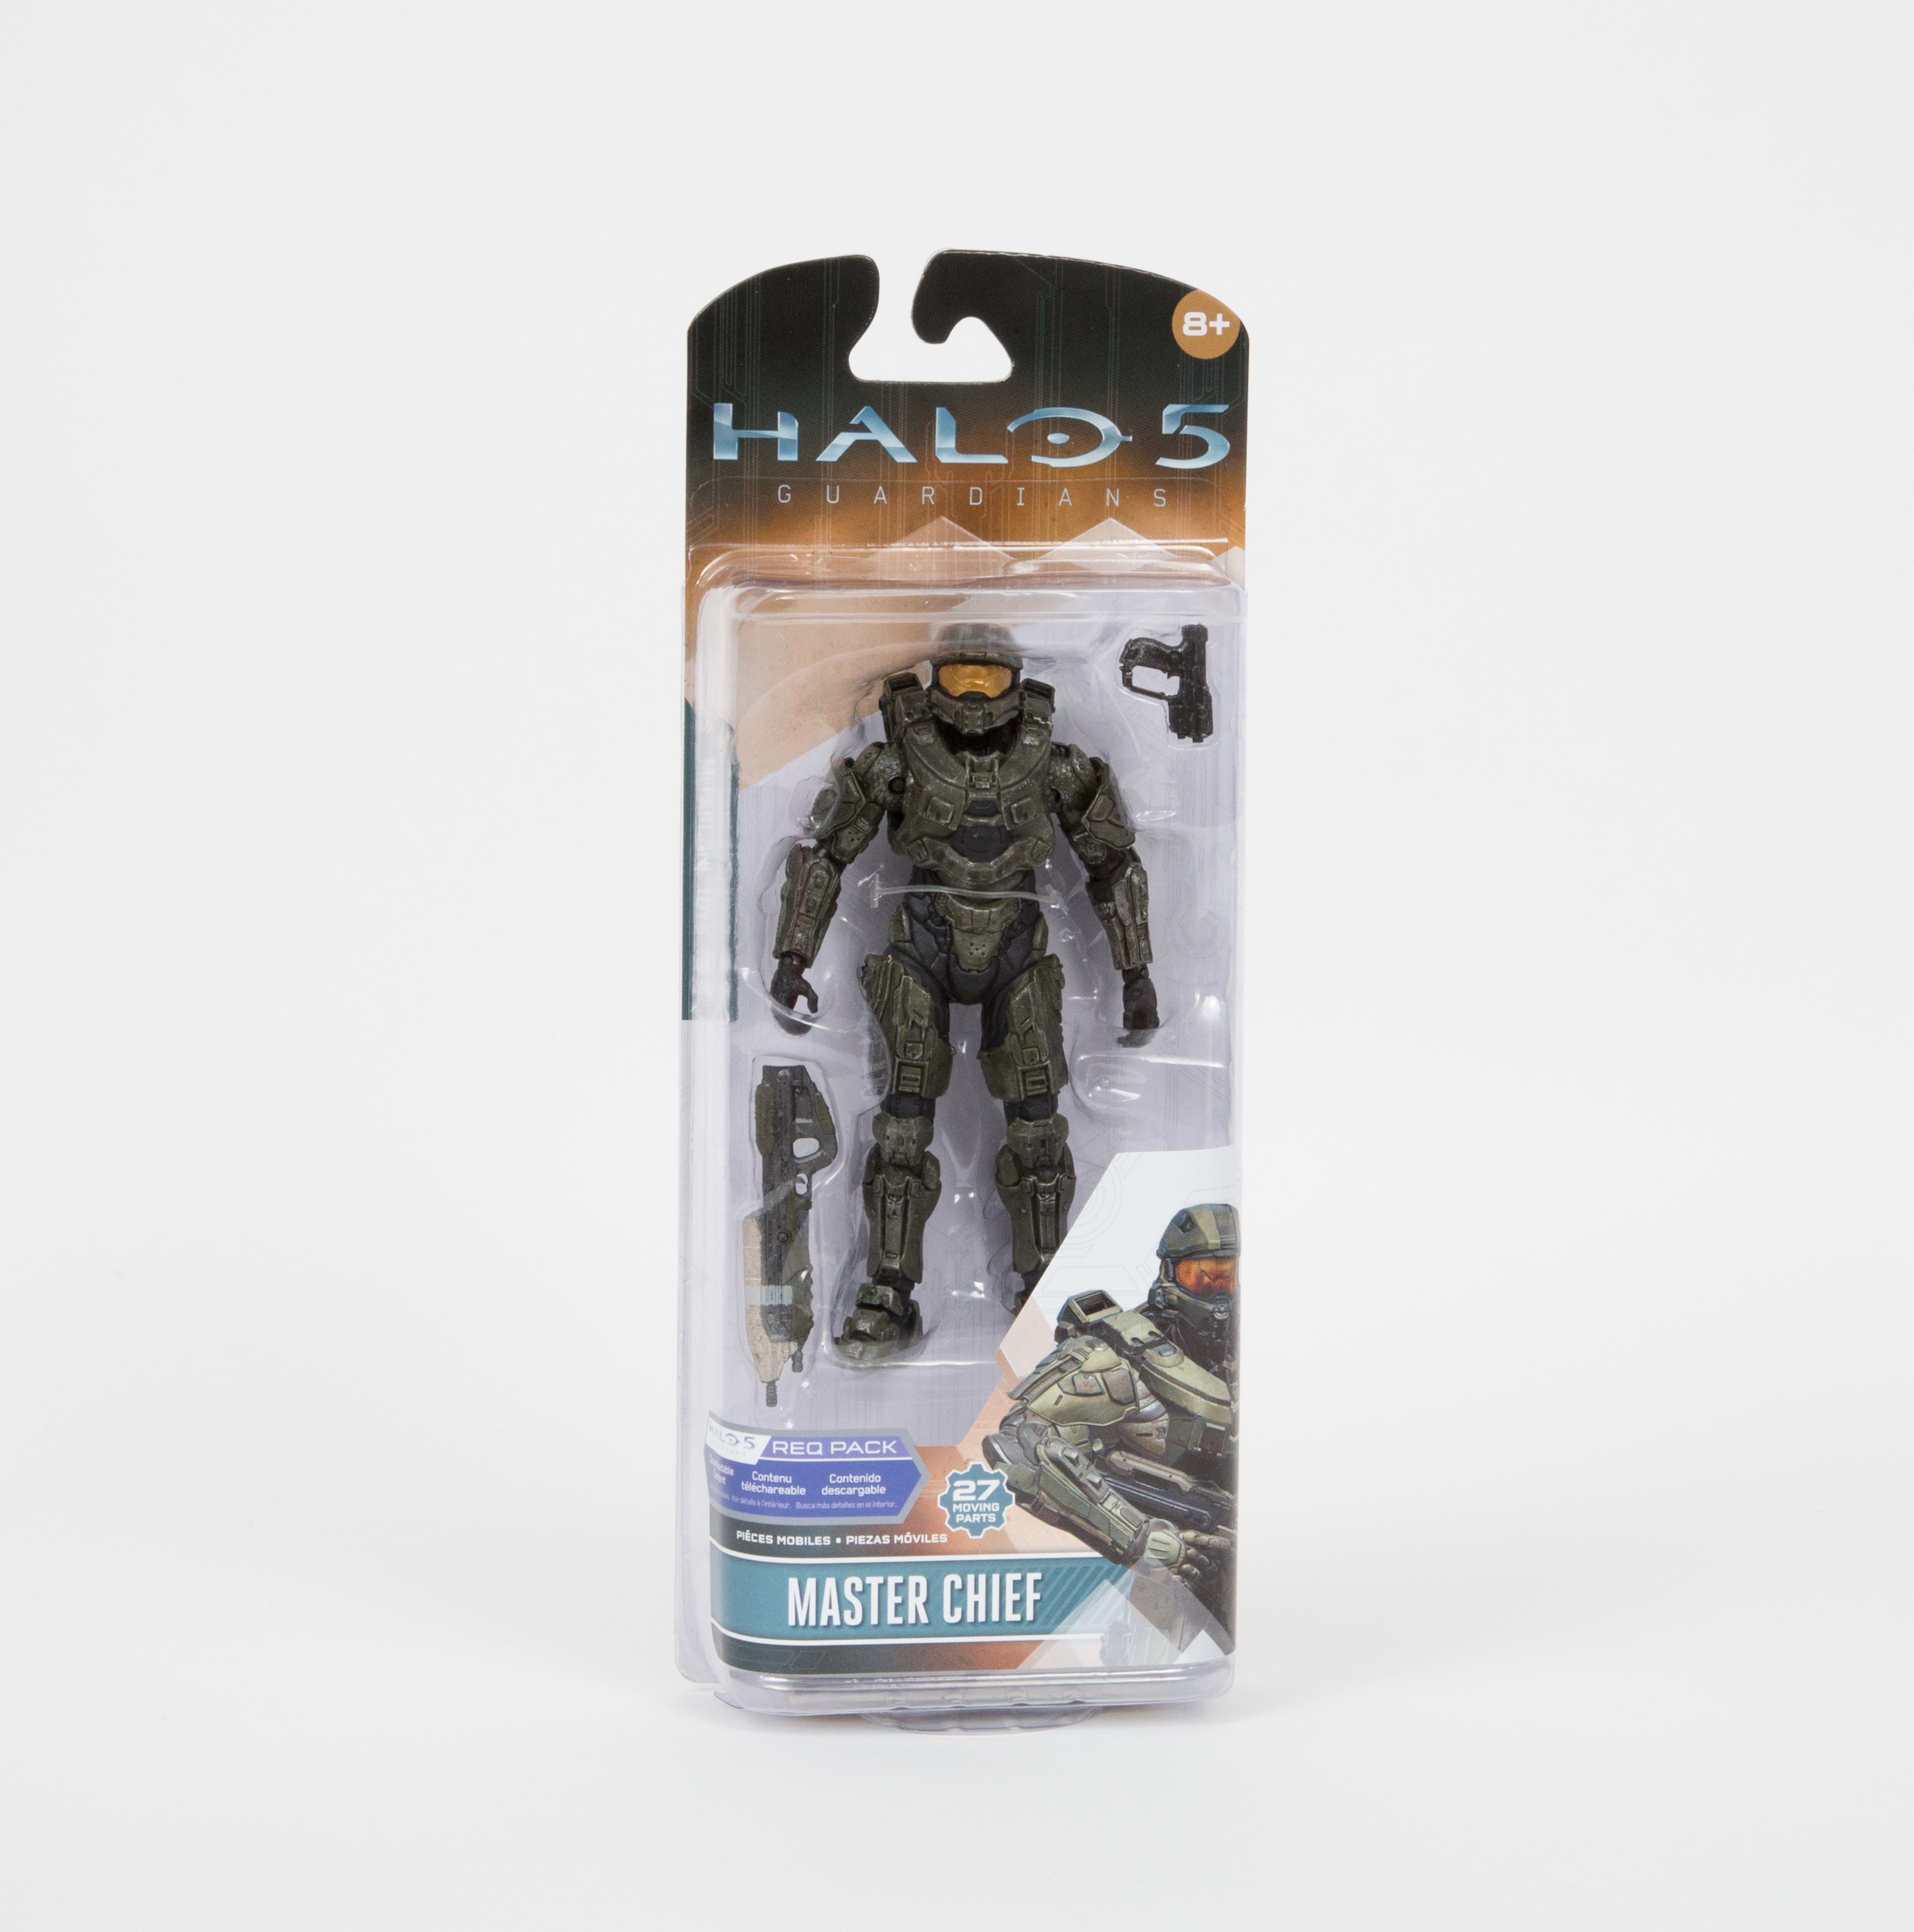  McFarlane Halo 5: Guardians Series 1 Master Chief Action Figure  : Toys & Games